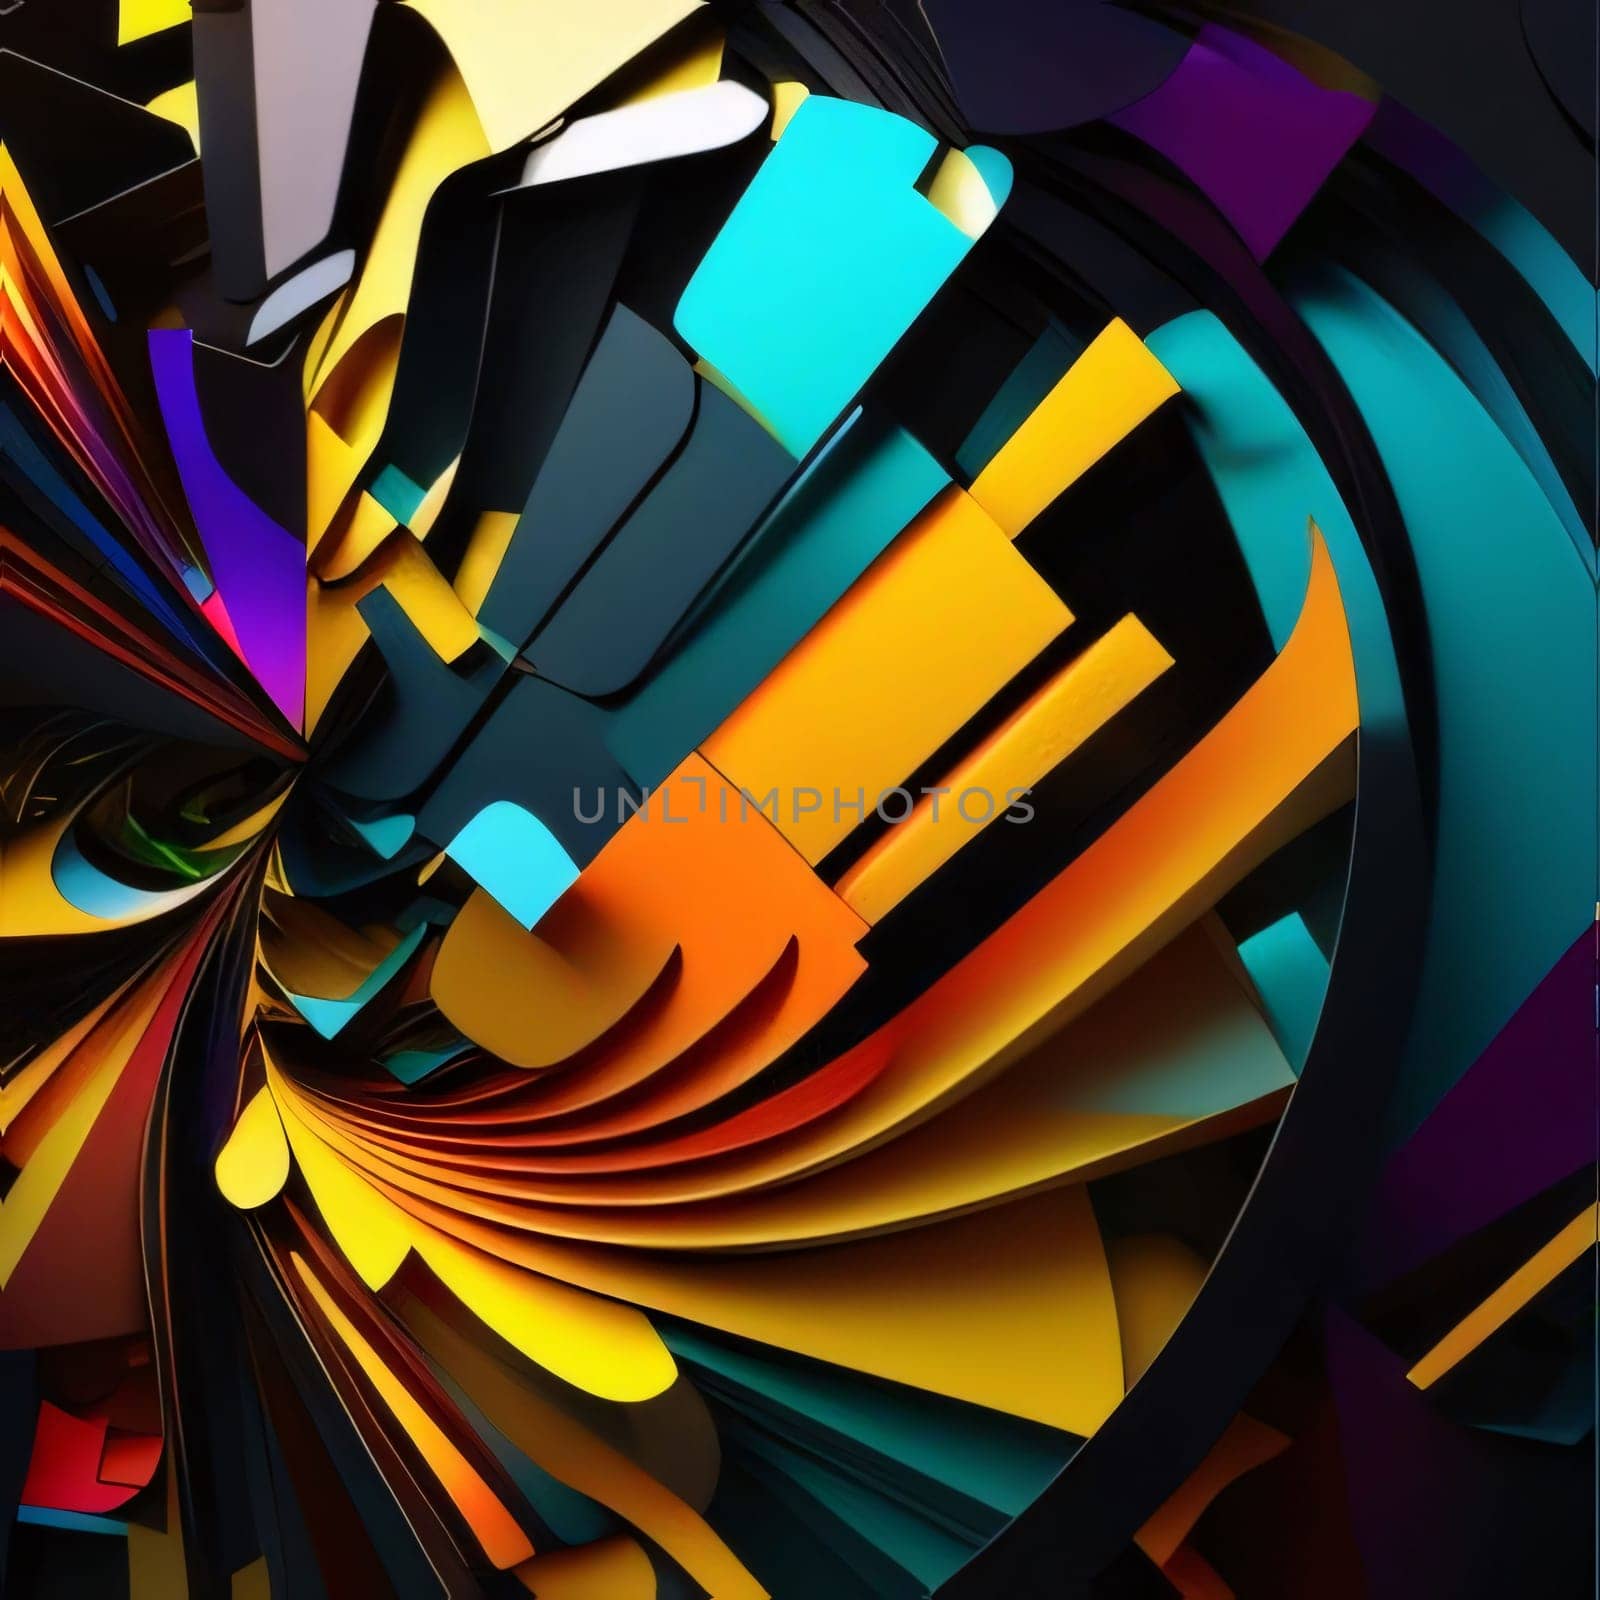 Abstract background design: 3d rendering of abstract geometric composition in low poly style with vibrant colors